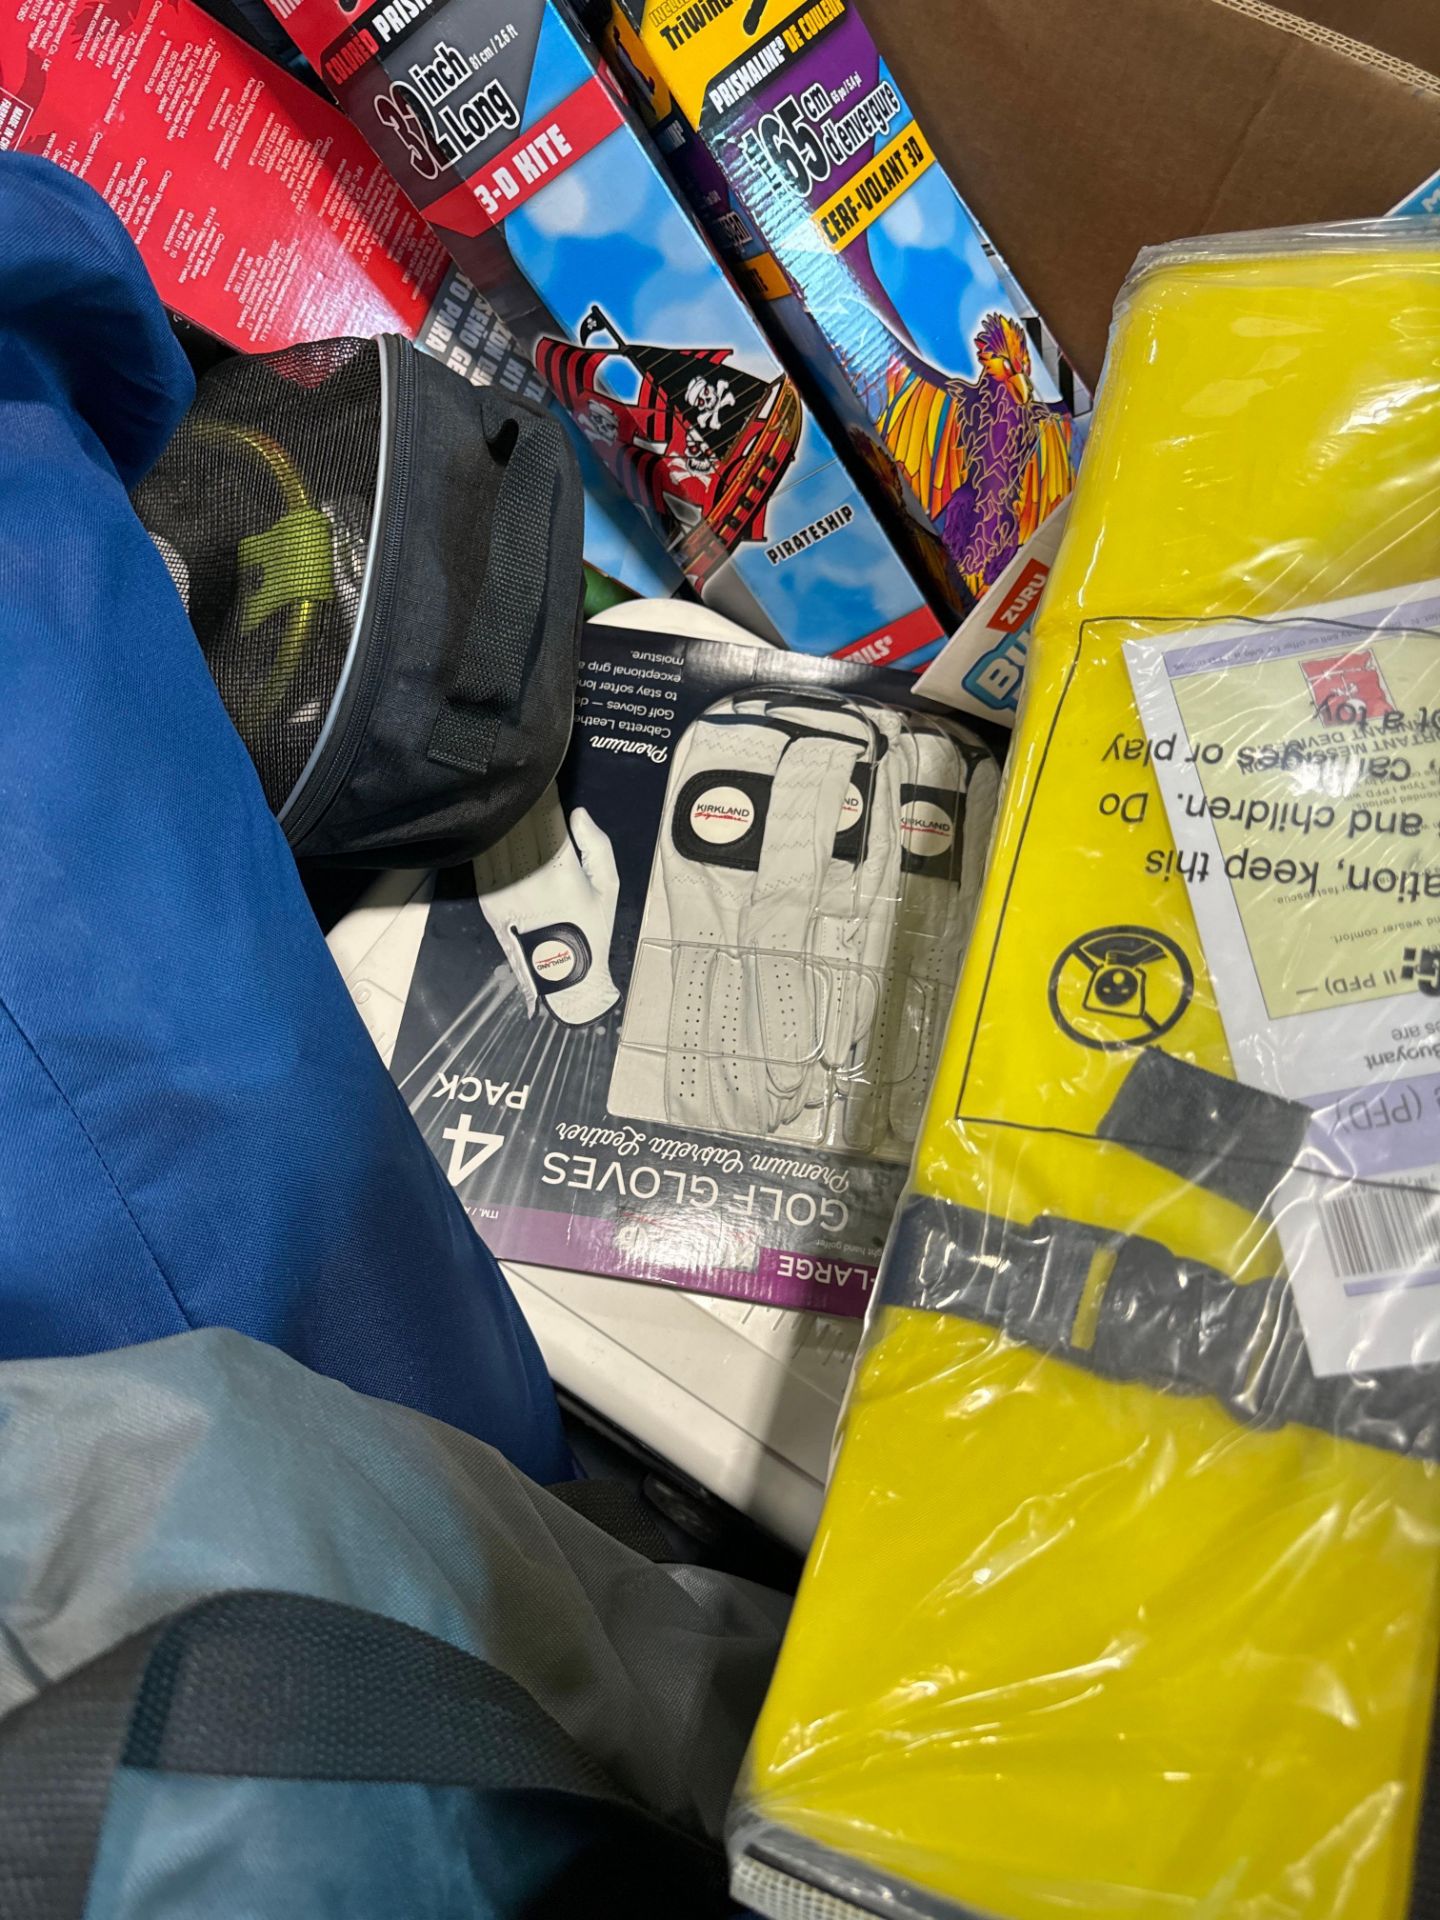 Kites, life jackets, car wash accessories, chairs, hiking poles, golf gloves and more - Image 4 of 10